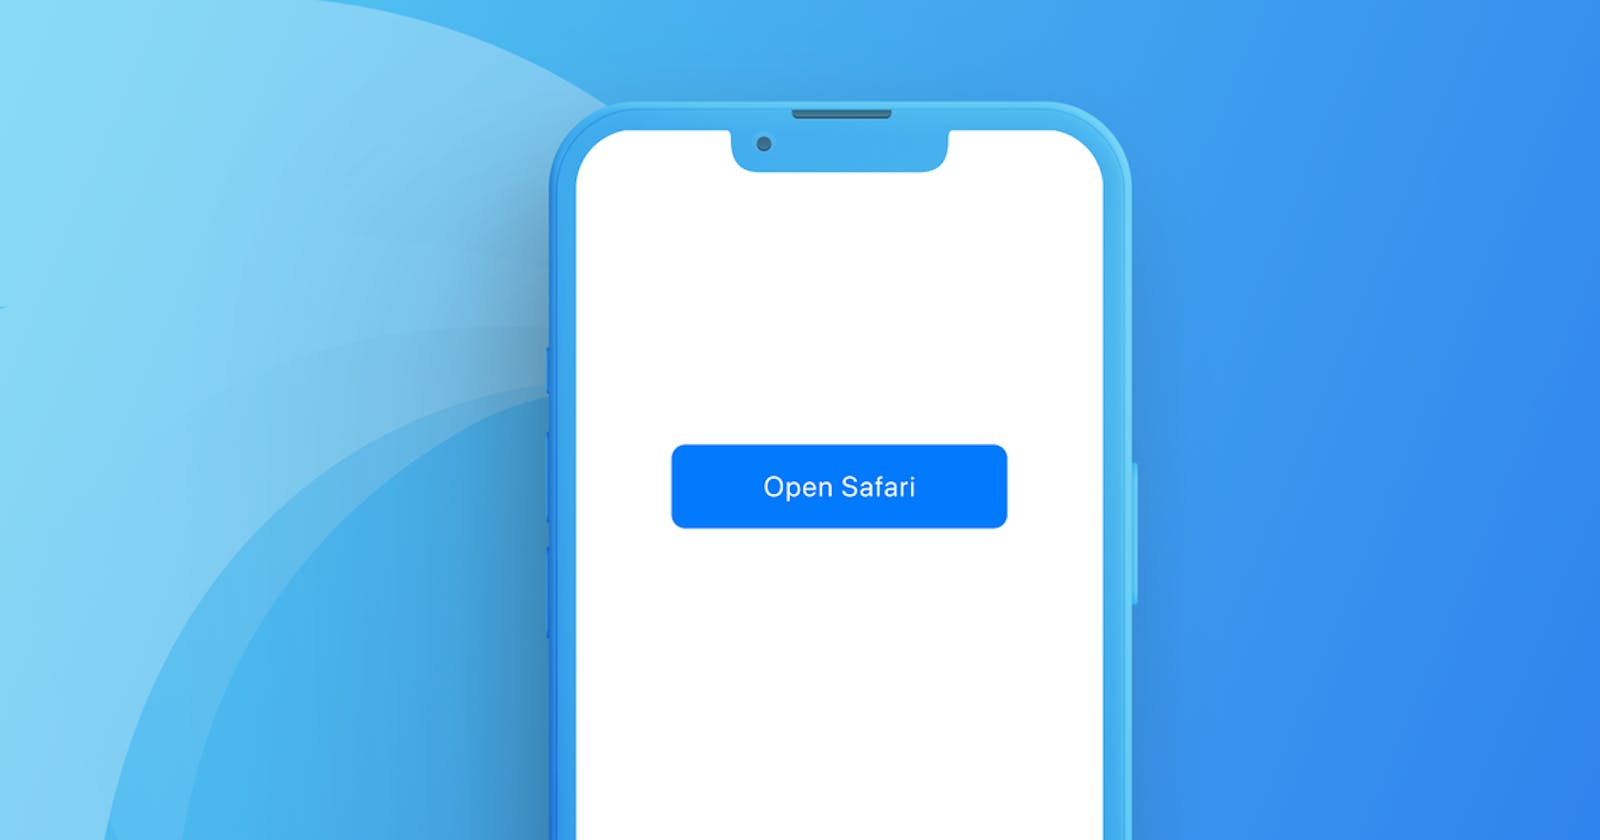 Links in SwiftUI